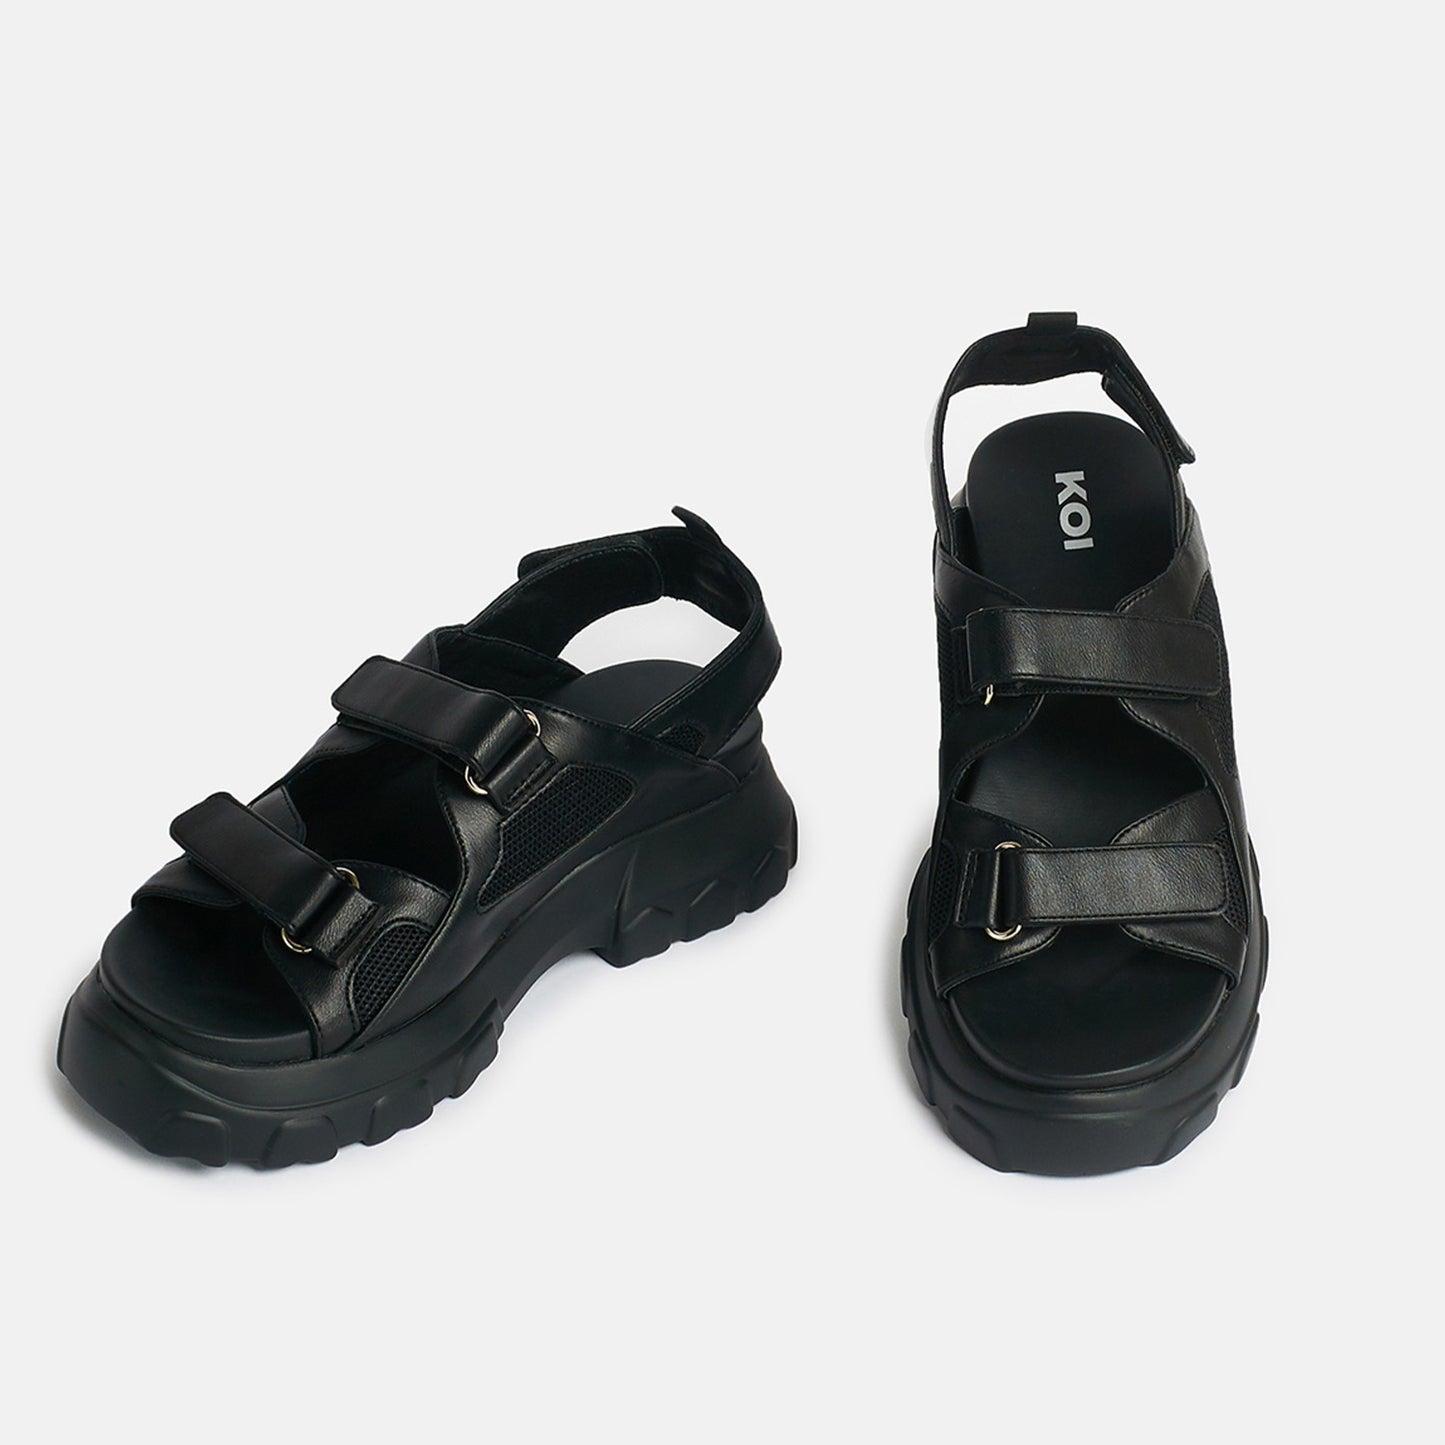 Fated Love Black Chunky Sandals - Sandals - KOI Footwear - Black - Top View